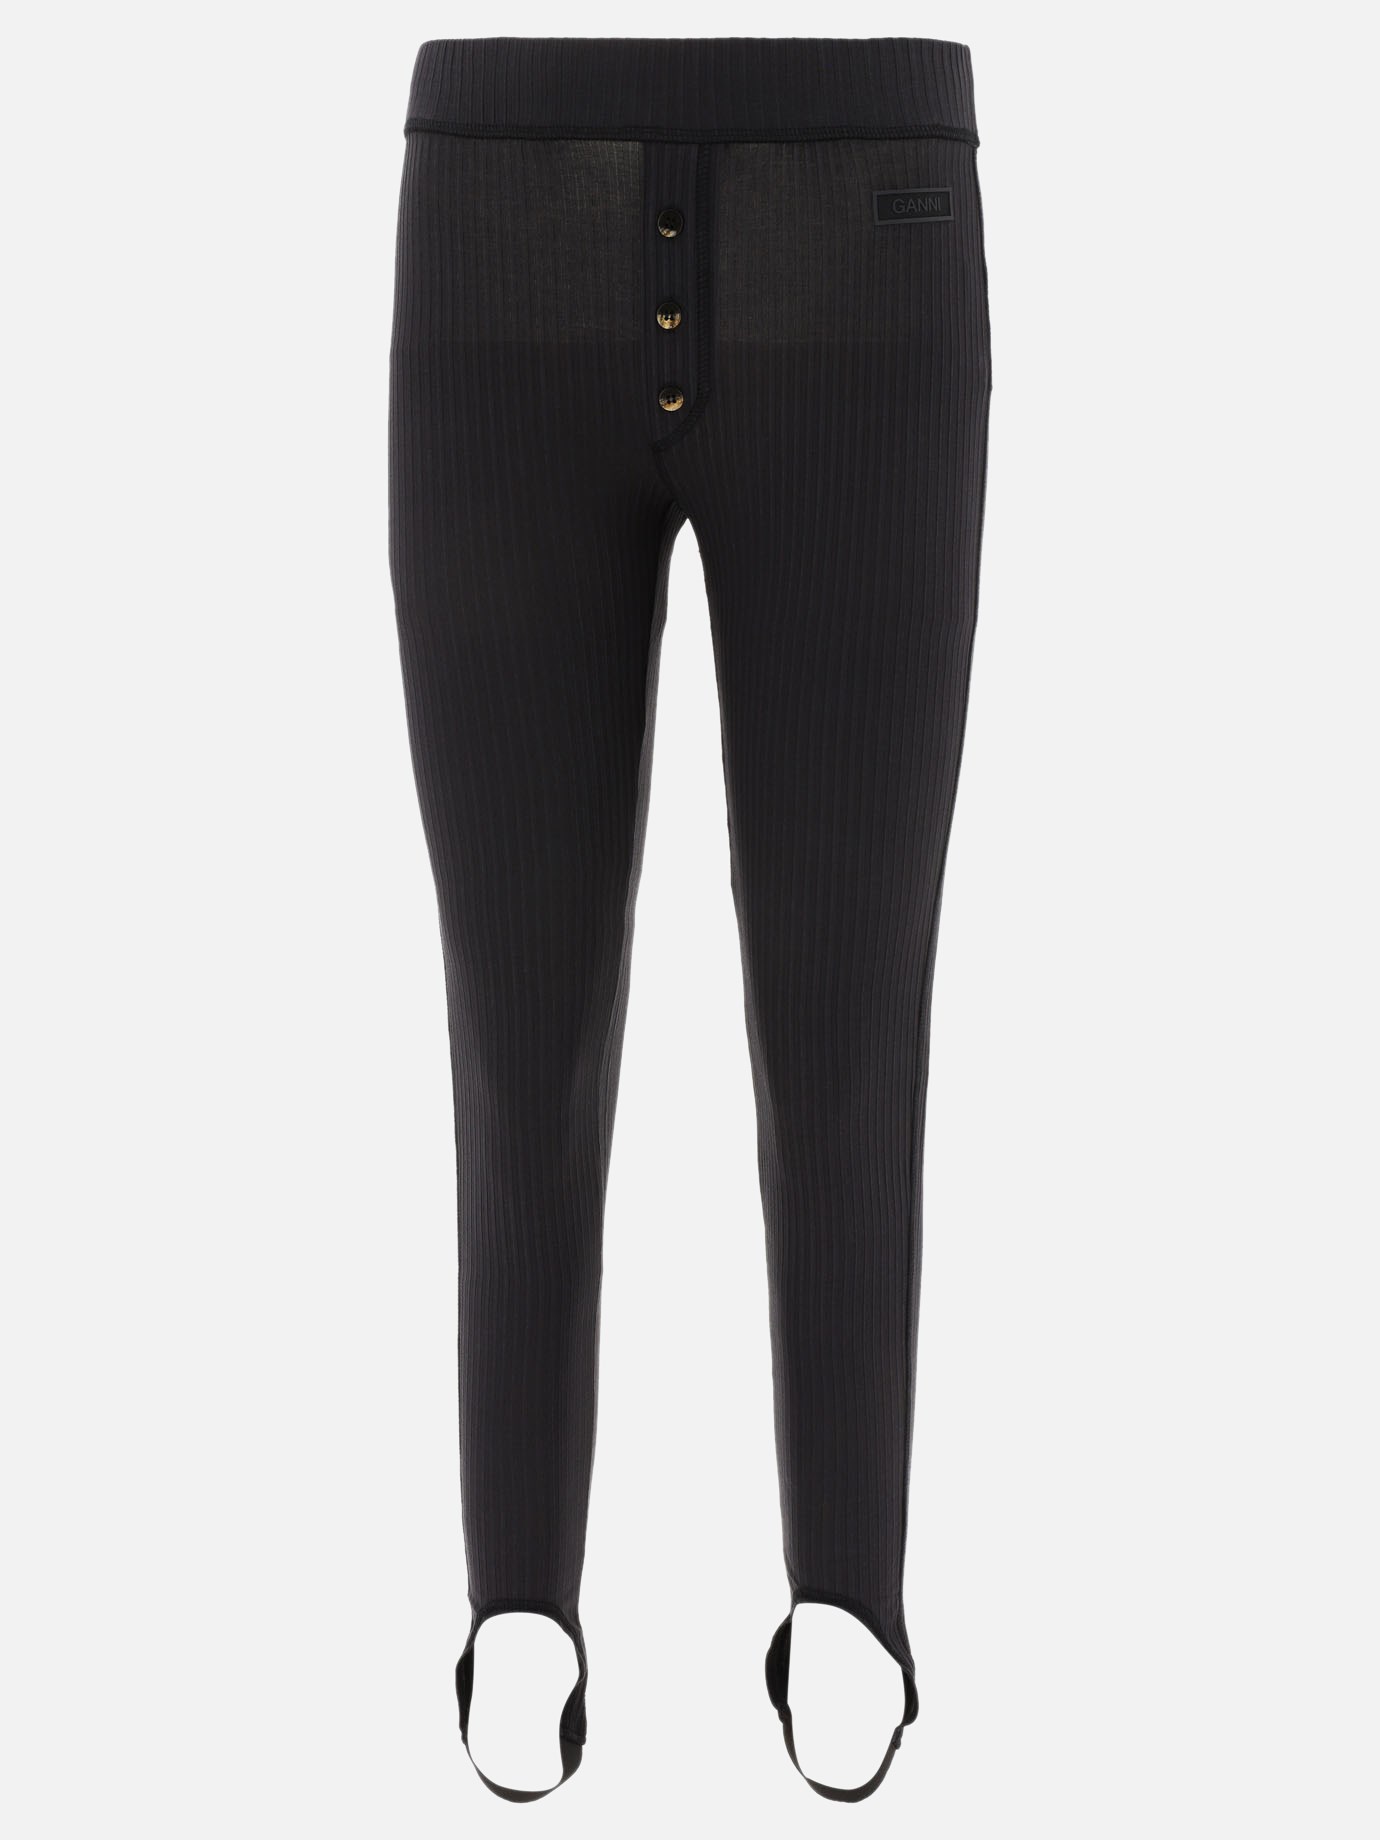 Ribbed leggings with stirrup